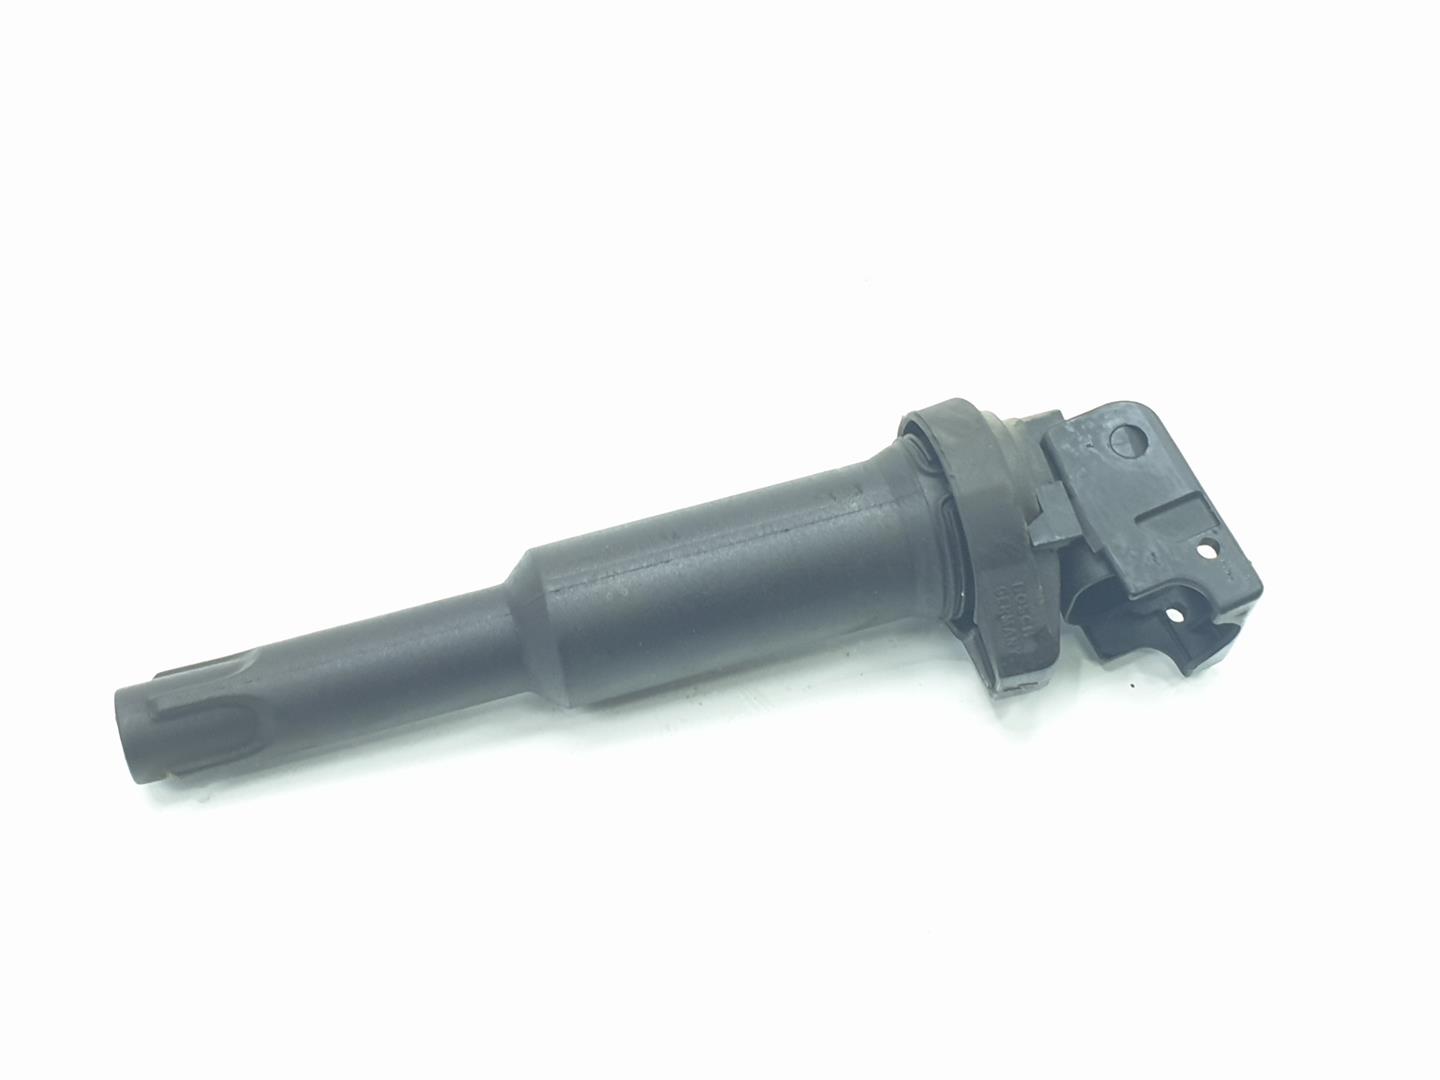 BMW 6 Series E63/E64 (2003-2010) High Voltage Ignition Coil 7548553, 7548553, 1111AA 24700112